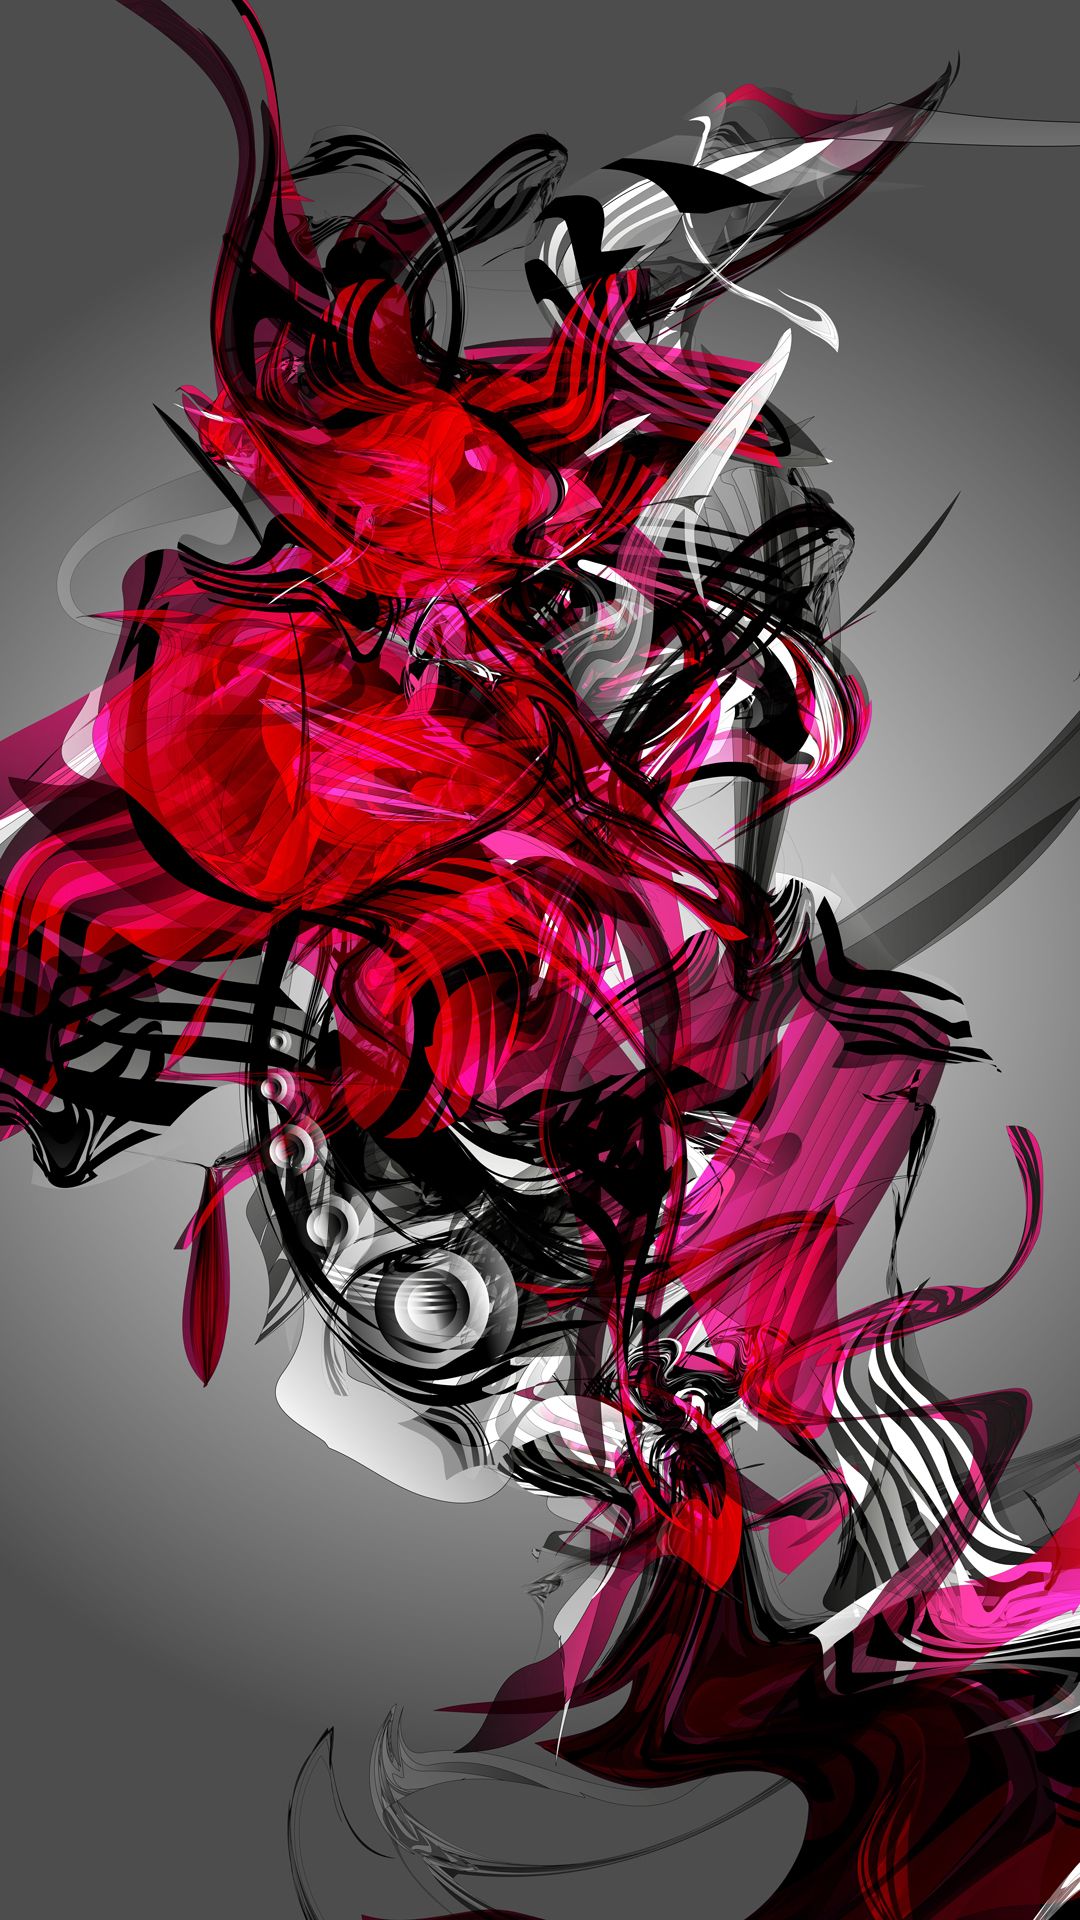 Abstract Colorful Shades Pink White Black Android Wallpaper free